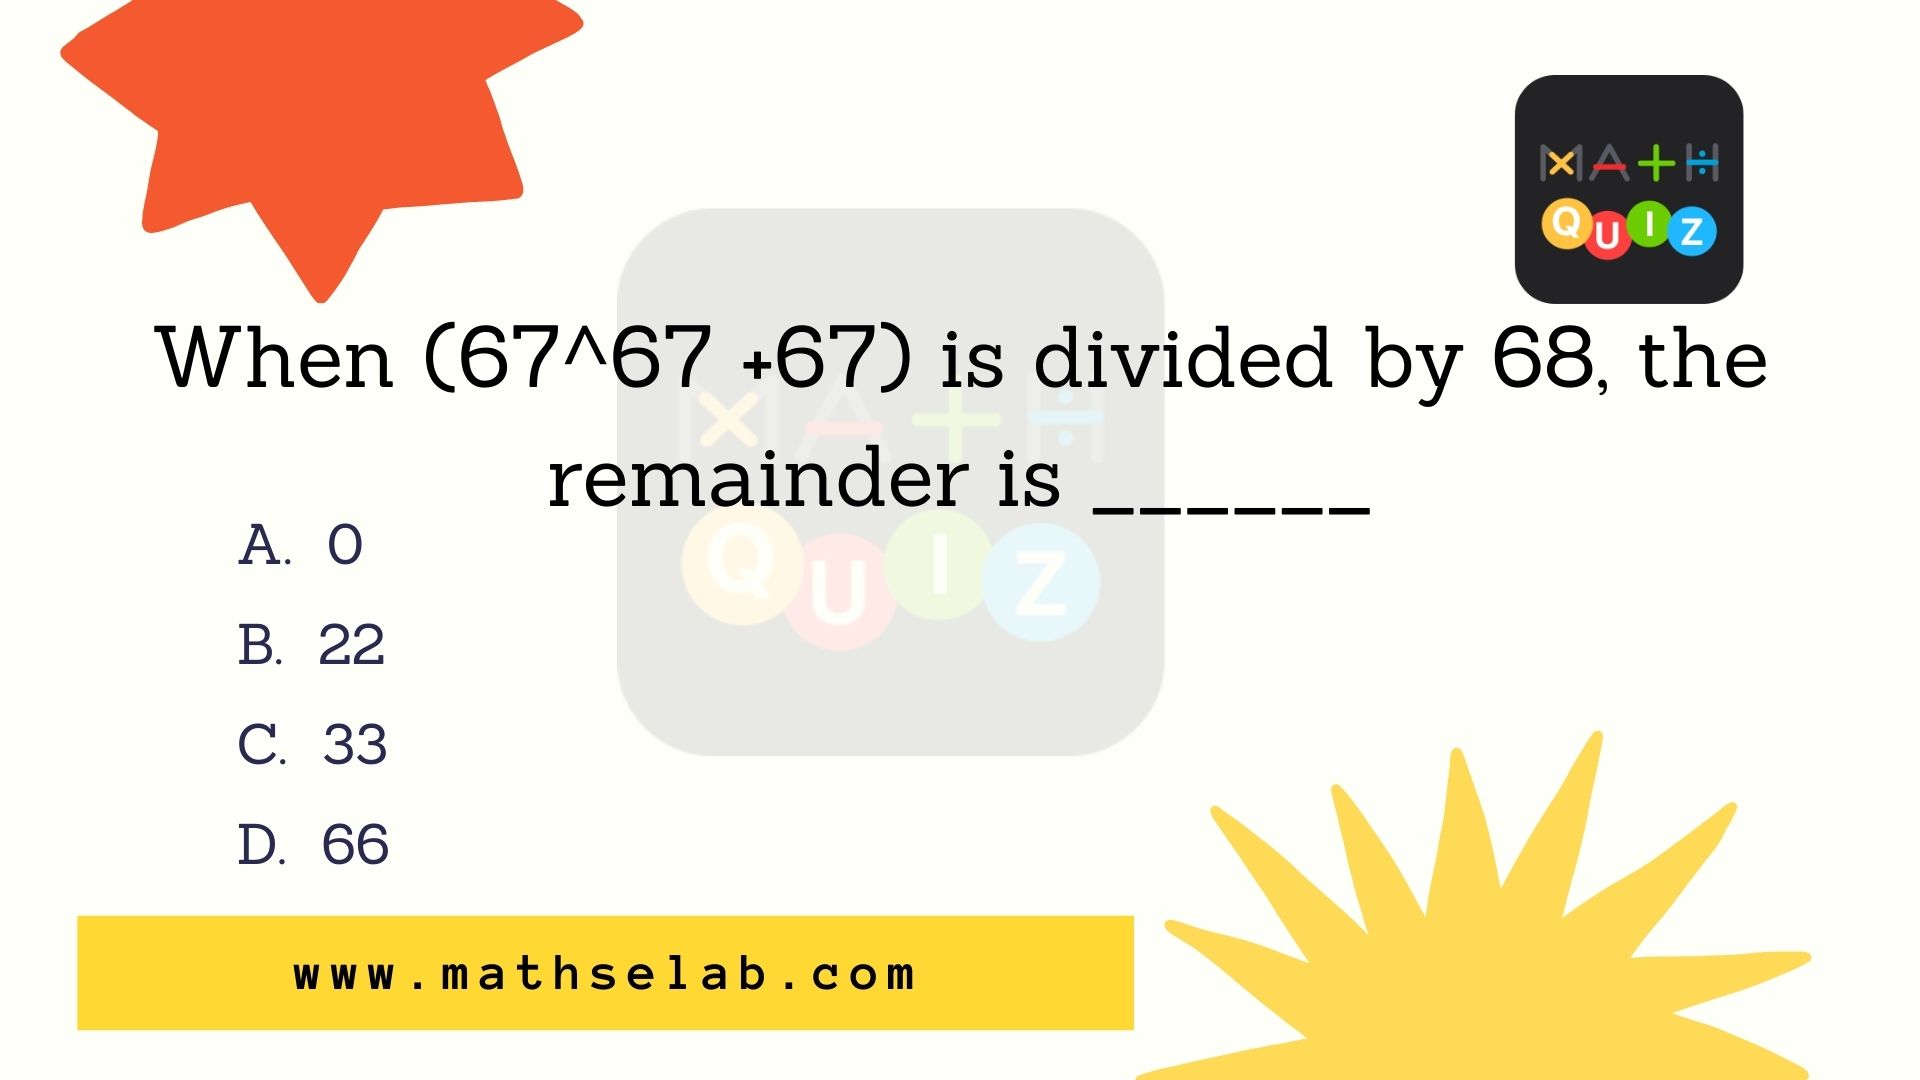 When (67^67 +67) is divided by 68, the remainder is ______ - mathselab.com